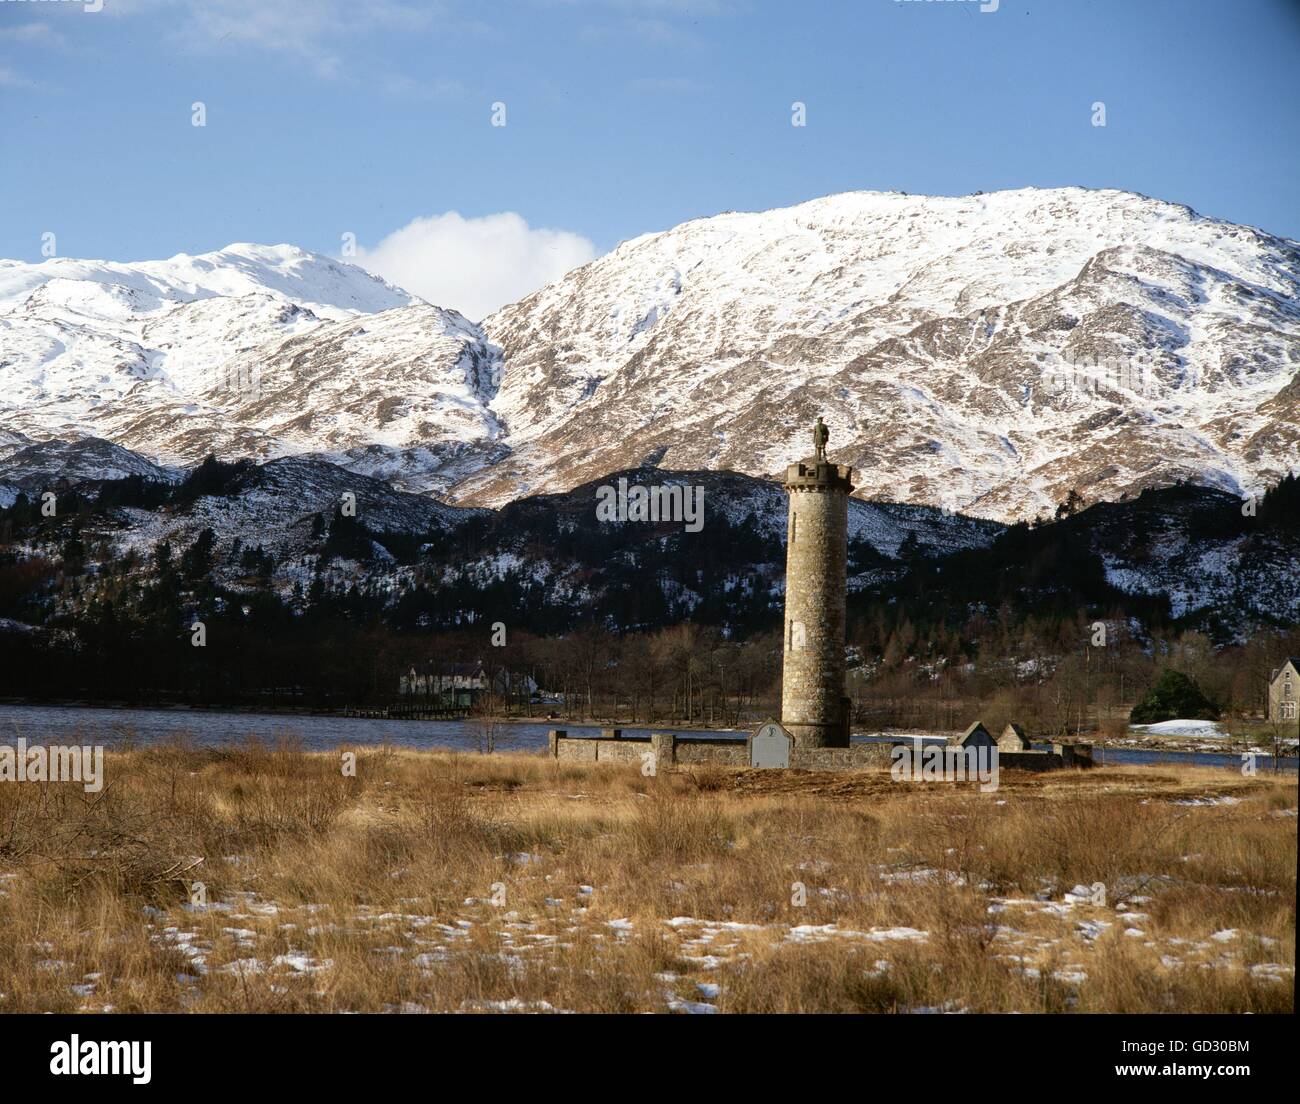 Scotland, Inverness-shire. Mid-winter in Glenfinnan, with the hills in snow. The monument to the rising of the standard in 1745 Stock Photo